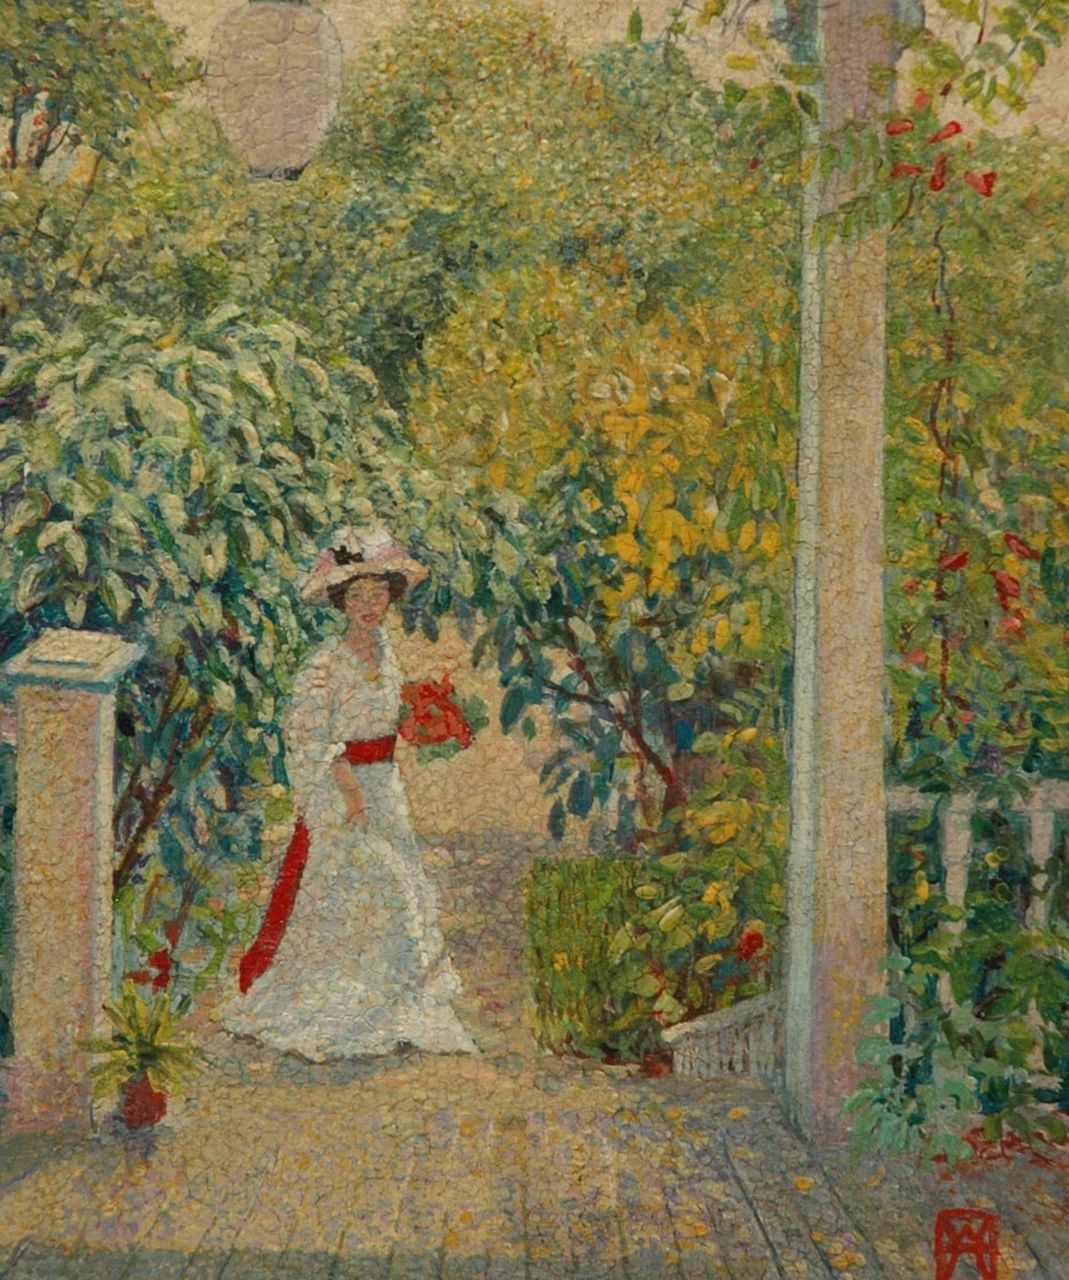 Ames W.  | Wally Ames, Woman in white dress in a garden, Öl auf Holzfaser 22,4 x 18,6 cm, signed l.r. with monogram